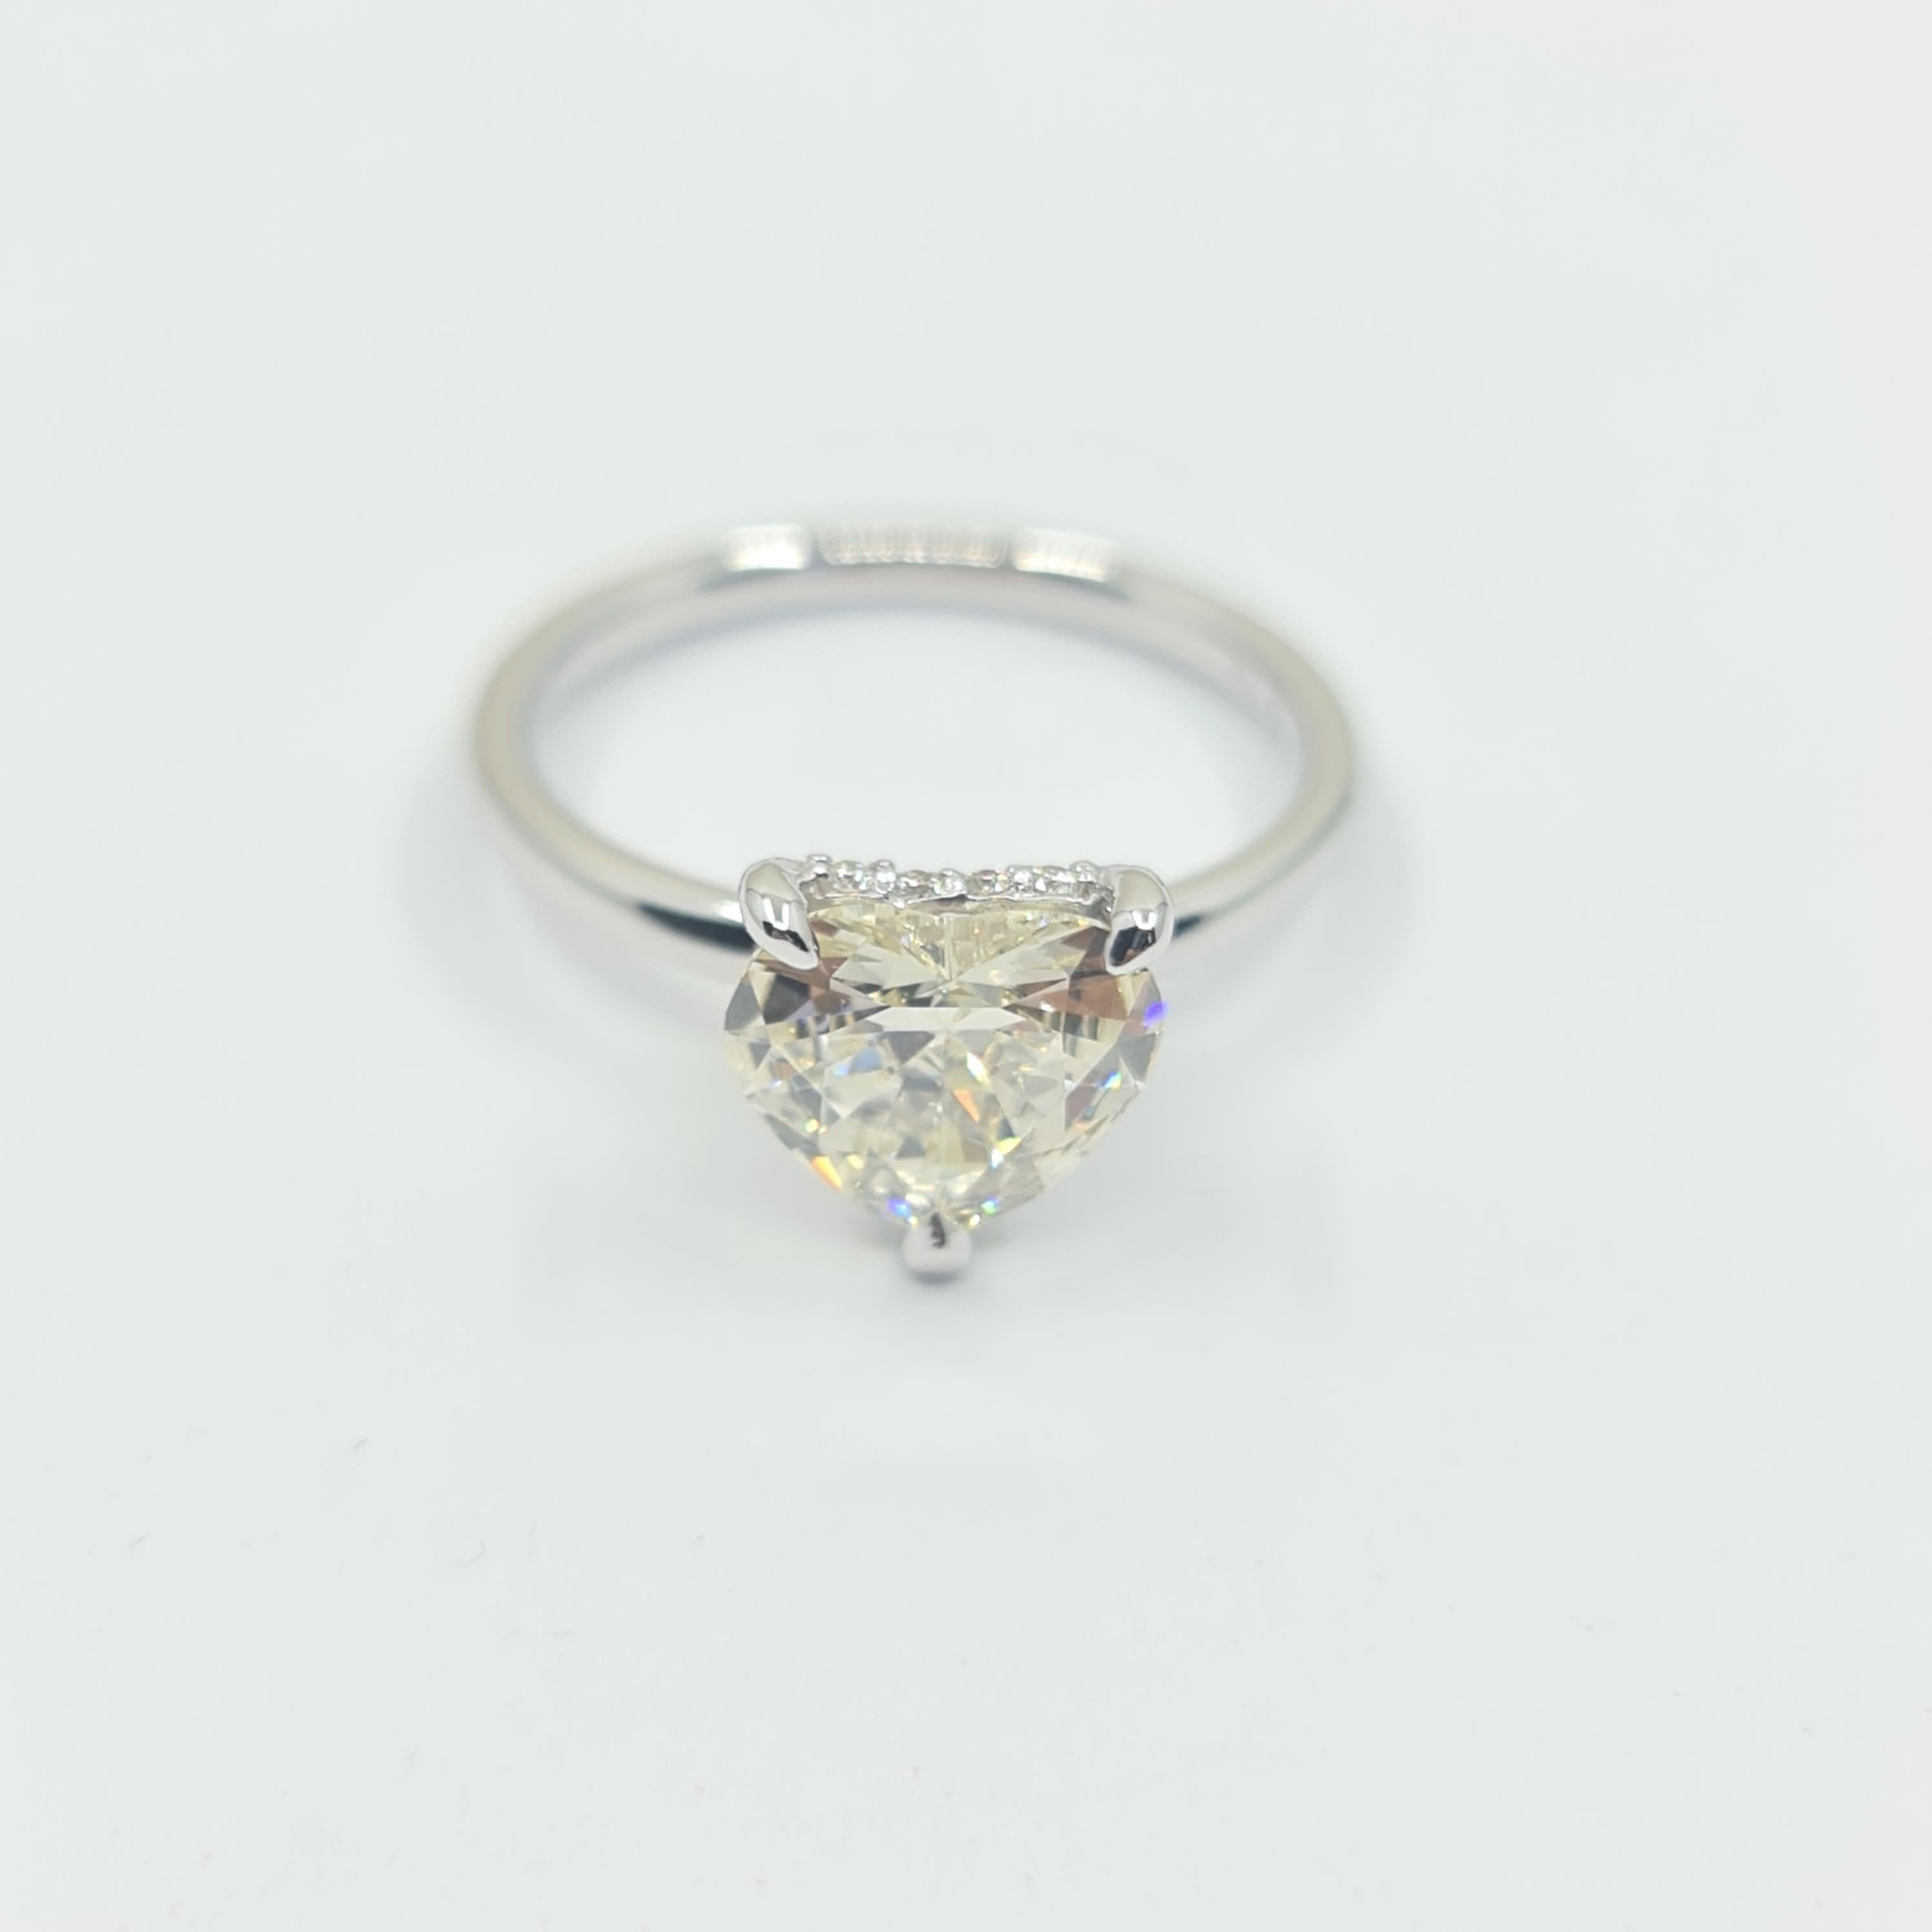 Exquisite GIA Certified 1.60 Carat Heart Diamond Ring with 0.07 Carat Halo G/VS

